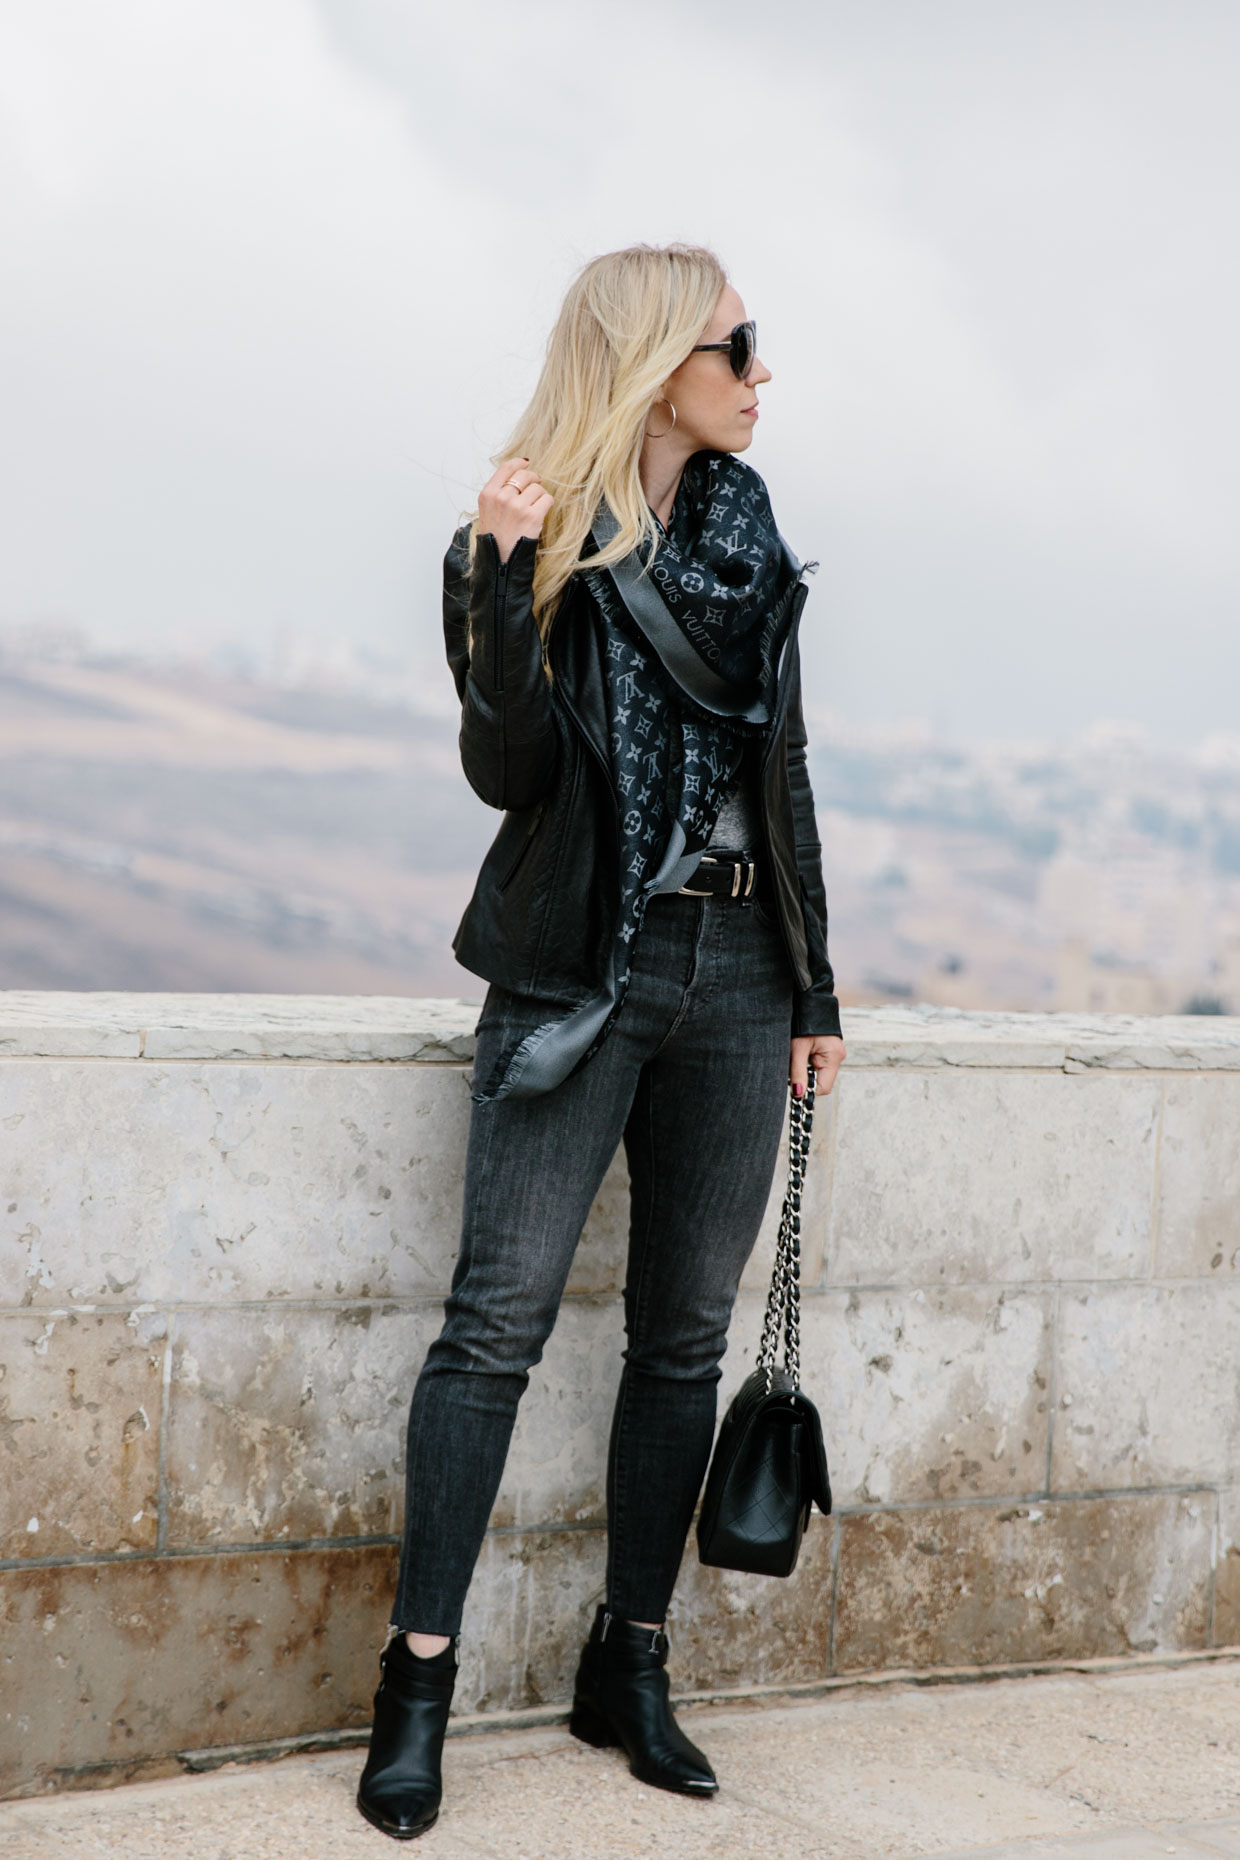 How to style a Louis Vuitton scarf with a leather jacket and gray